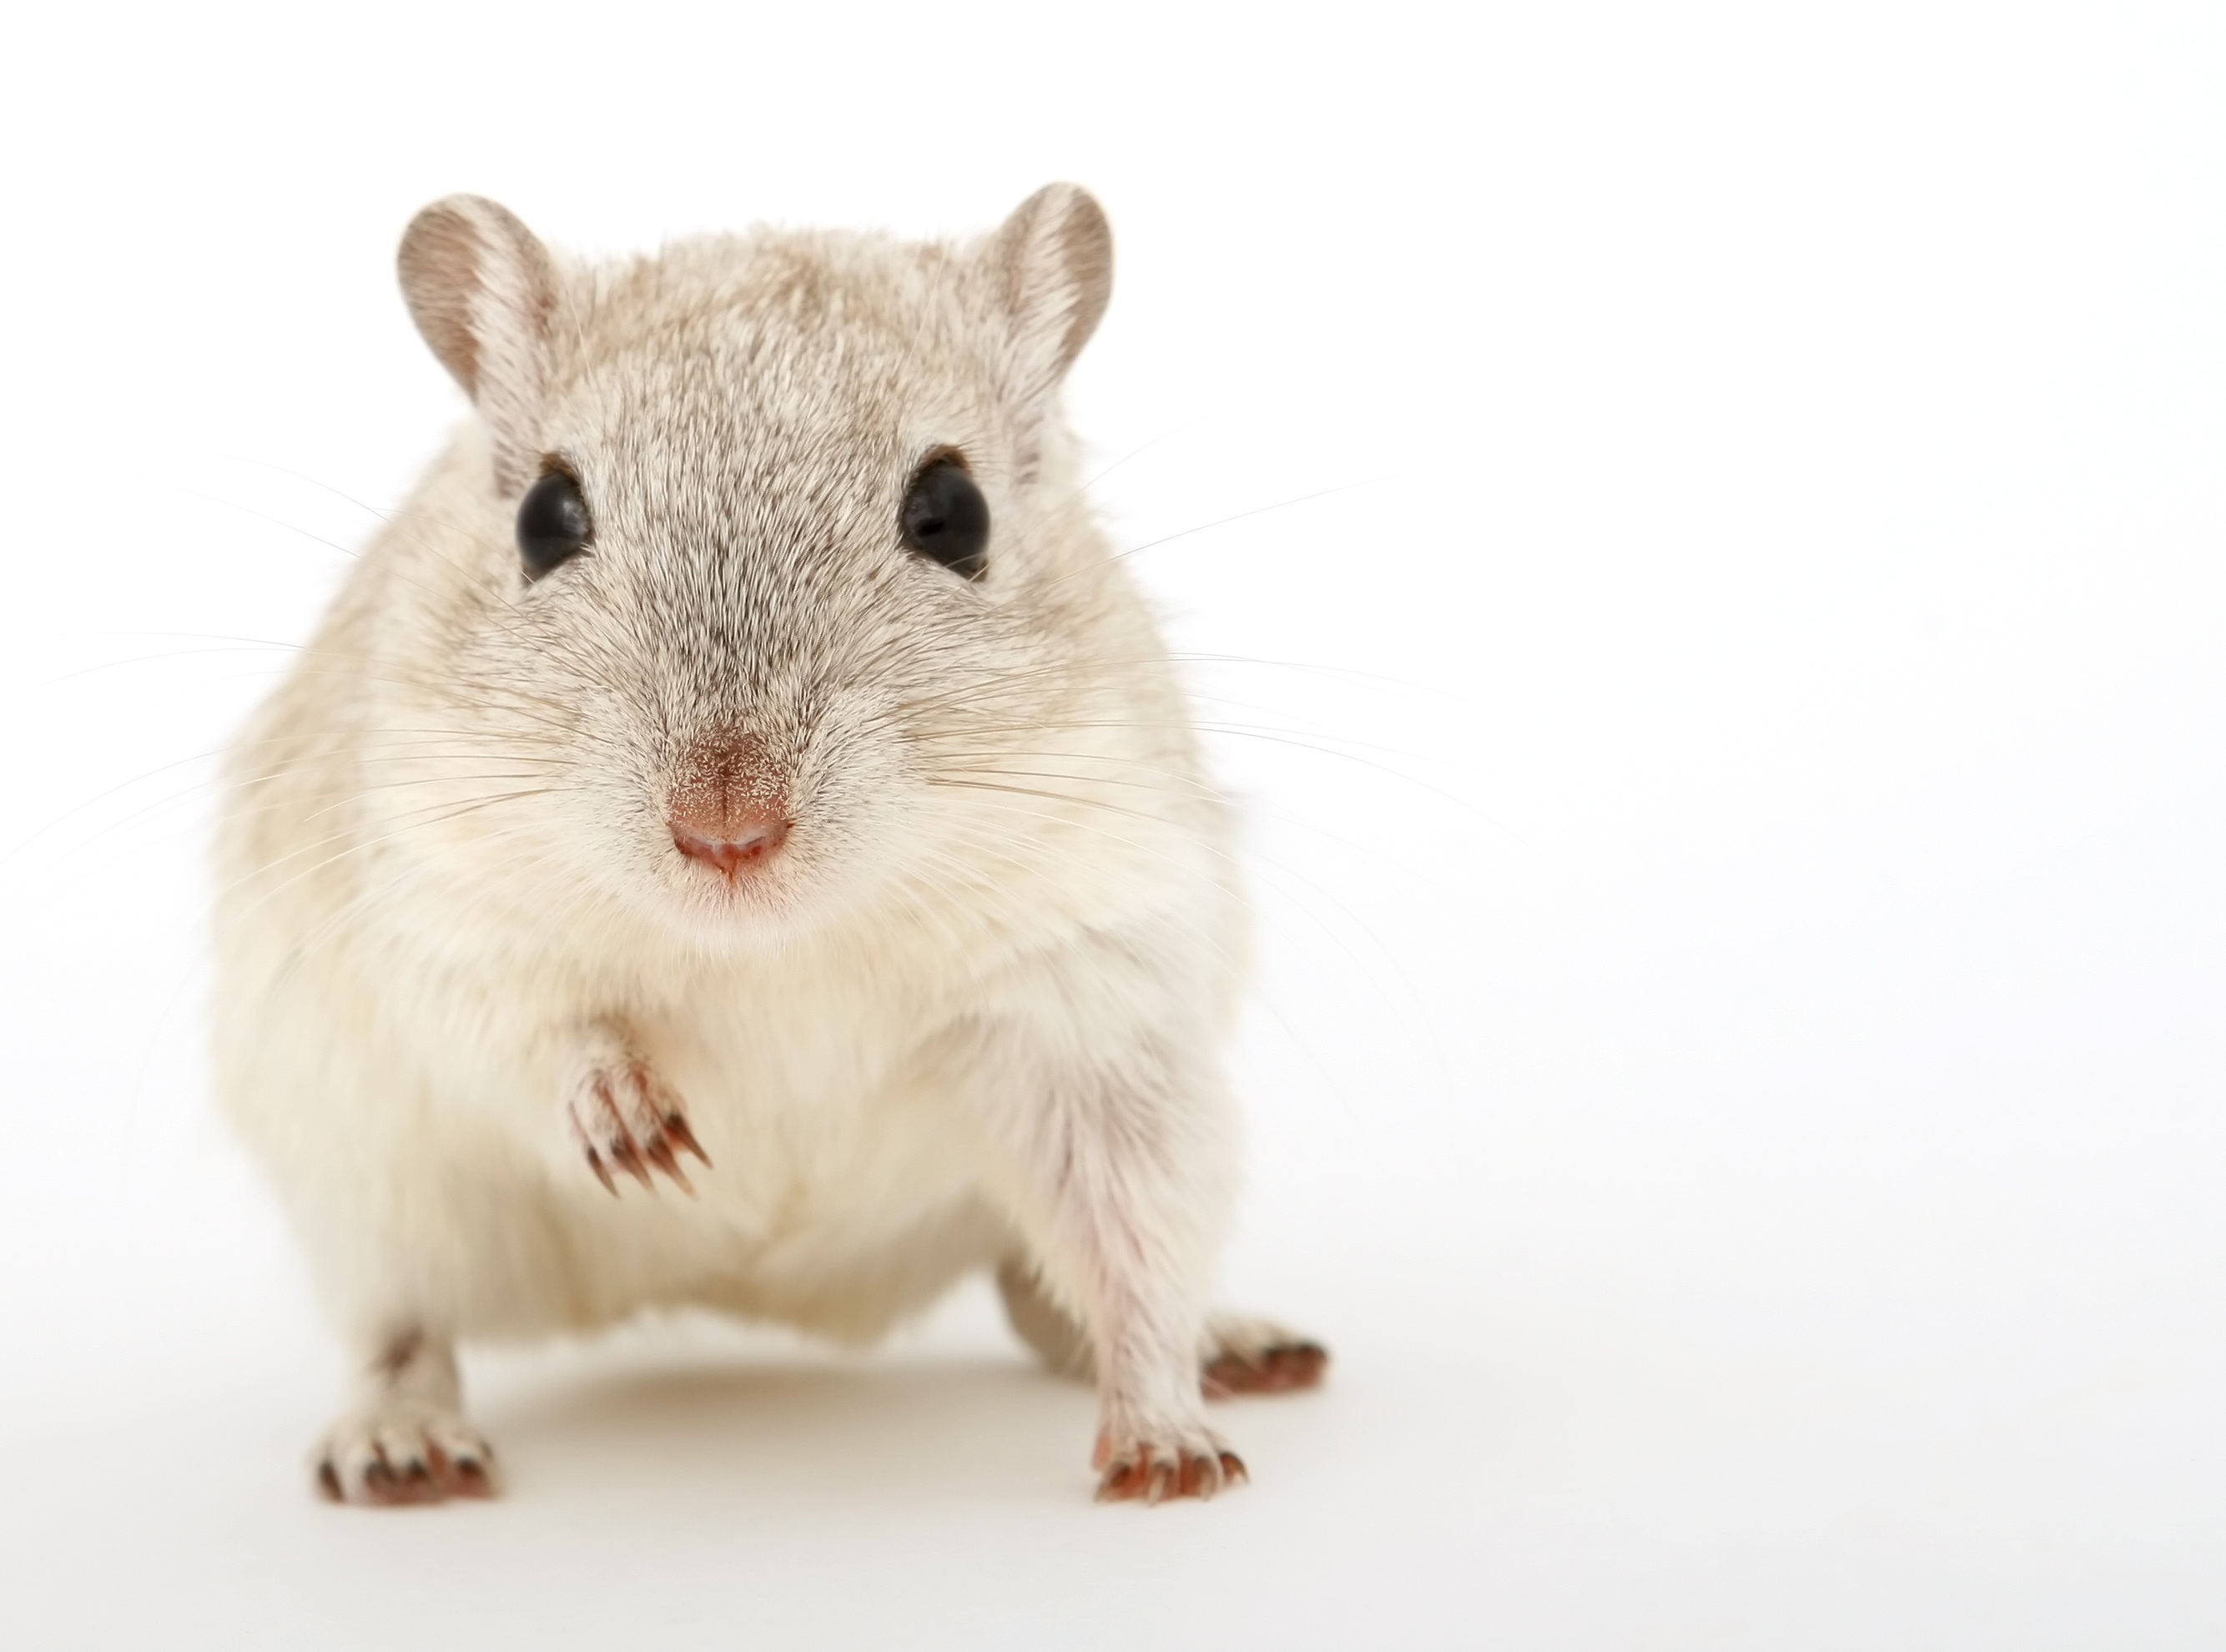 Wallpapers white mouse animal on the desktop